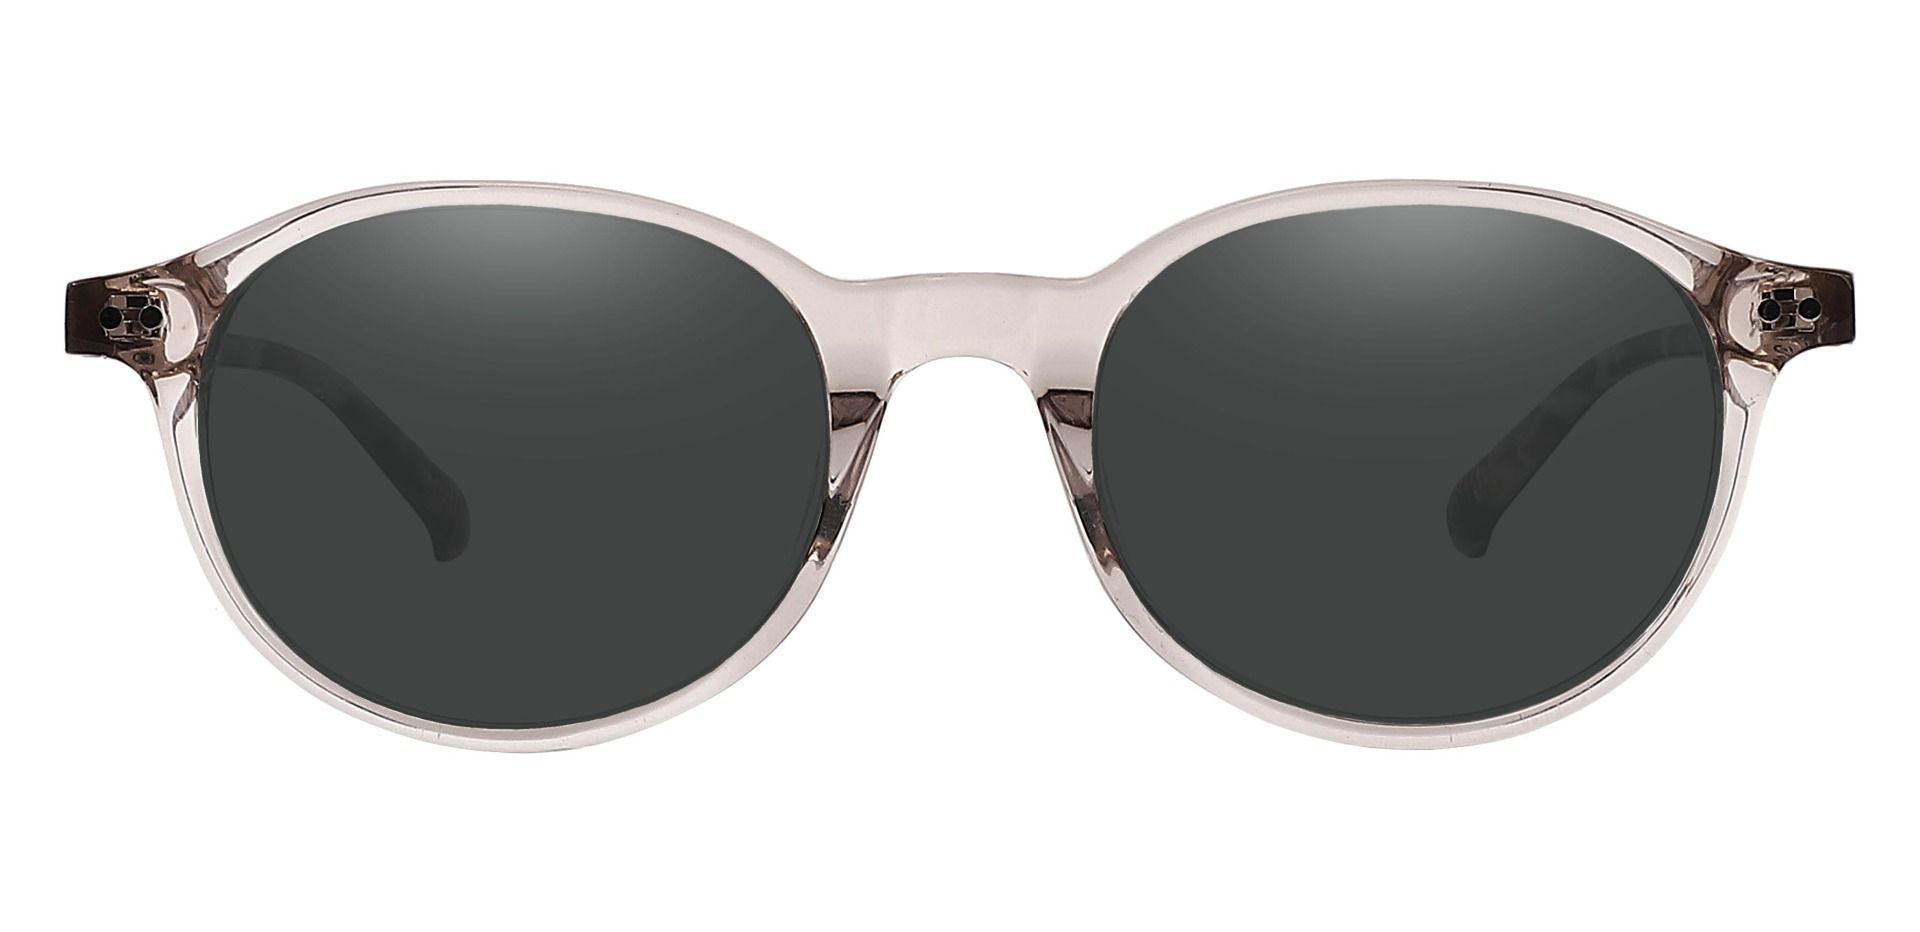 Avon Oval Non-Rx Sunglasses - Clear Frame With Gray Lenses